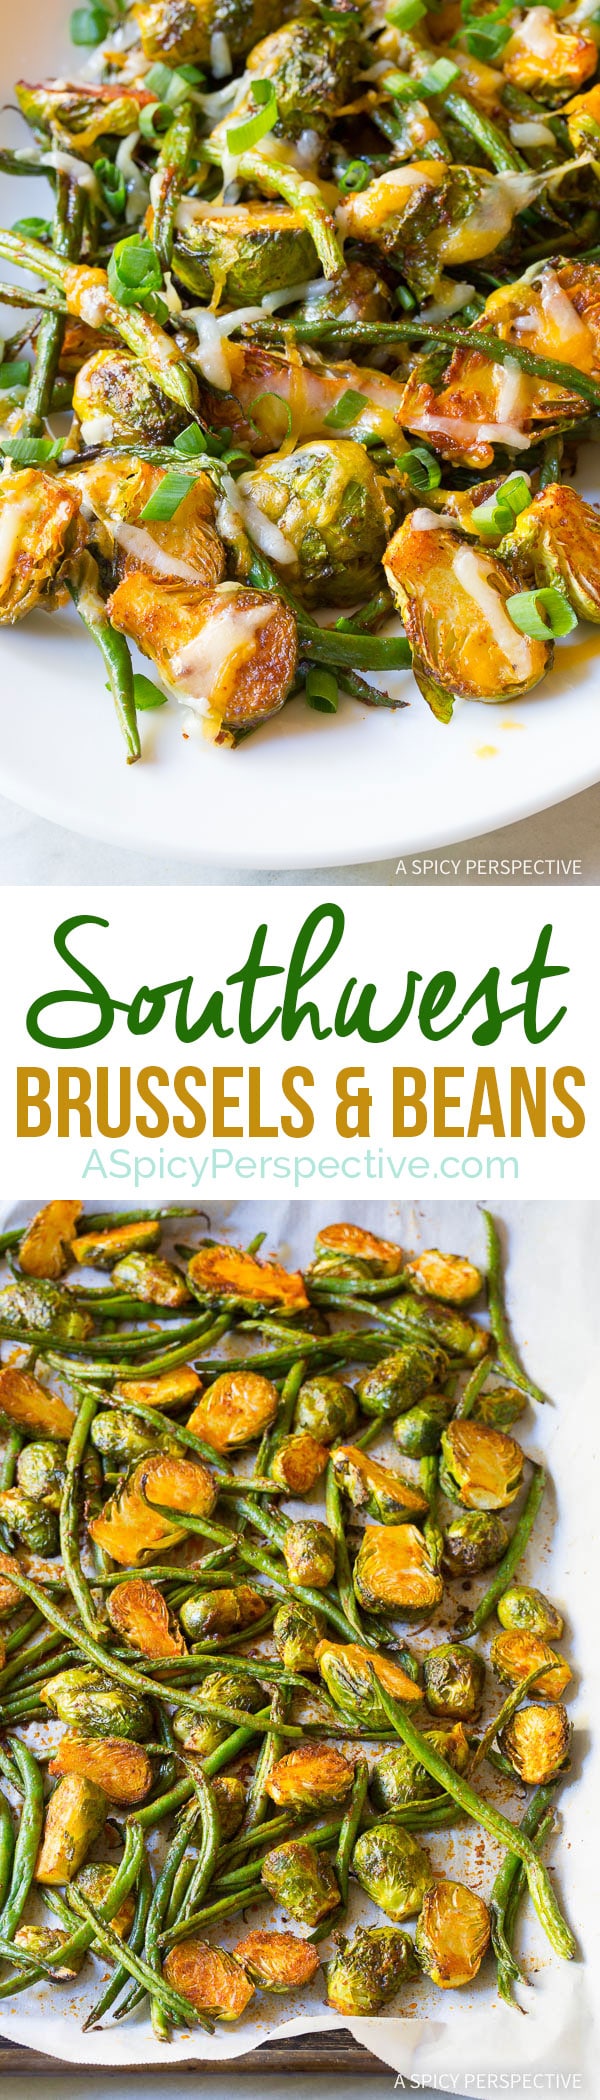 Easy 6-Ingredient Southwest Brussels and Beans on ASpicyPerspective.com